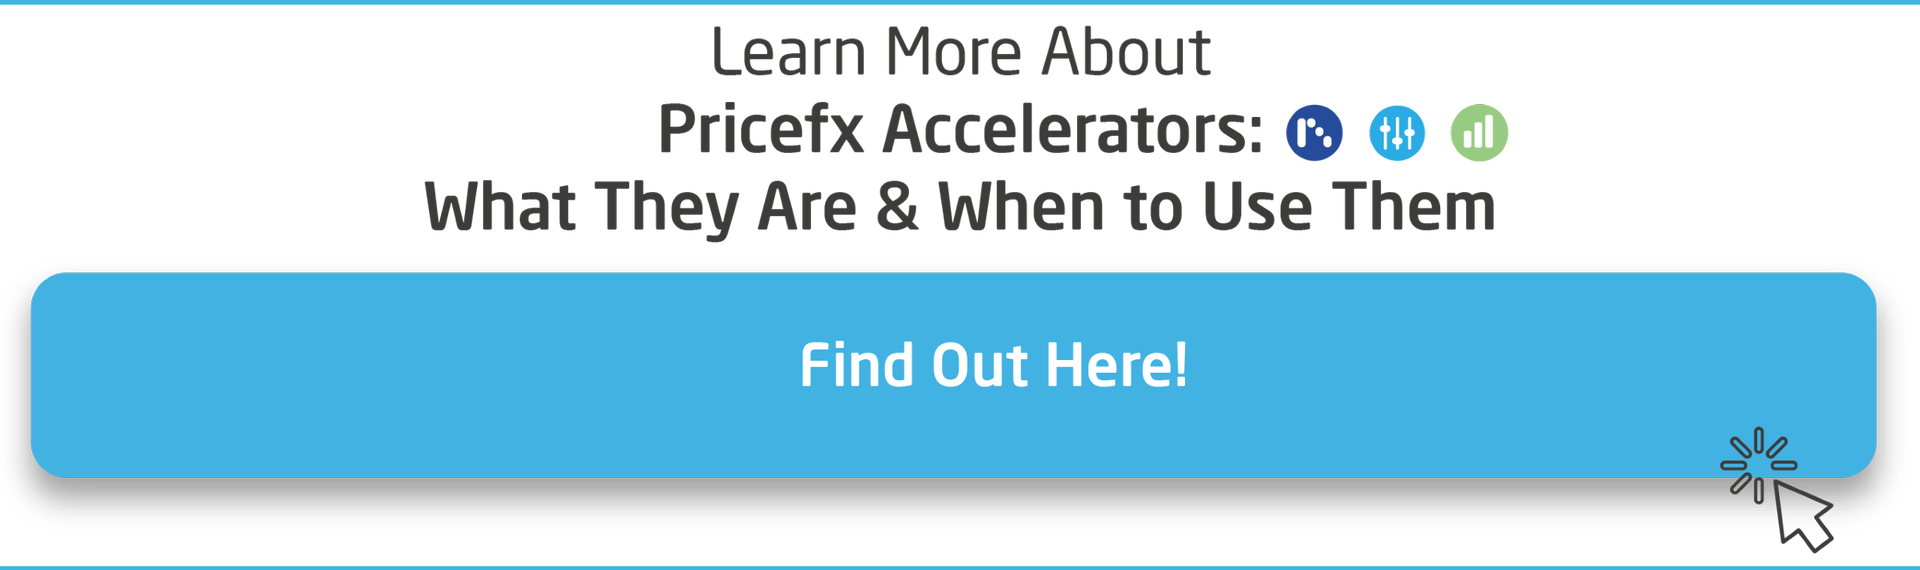 CTA-Pricefx-Accelerators-What-Are-They-And-When-To-Use-Them